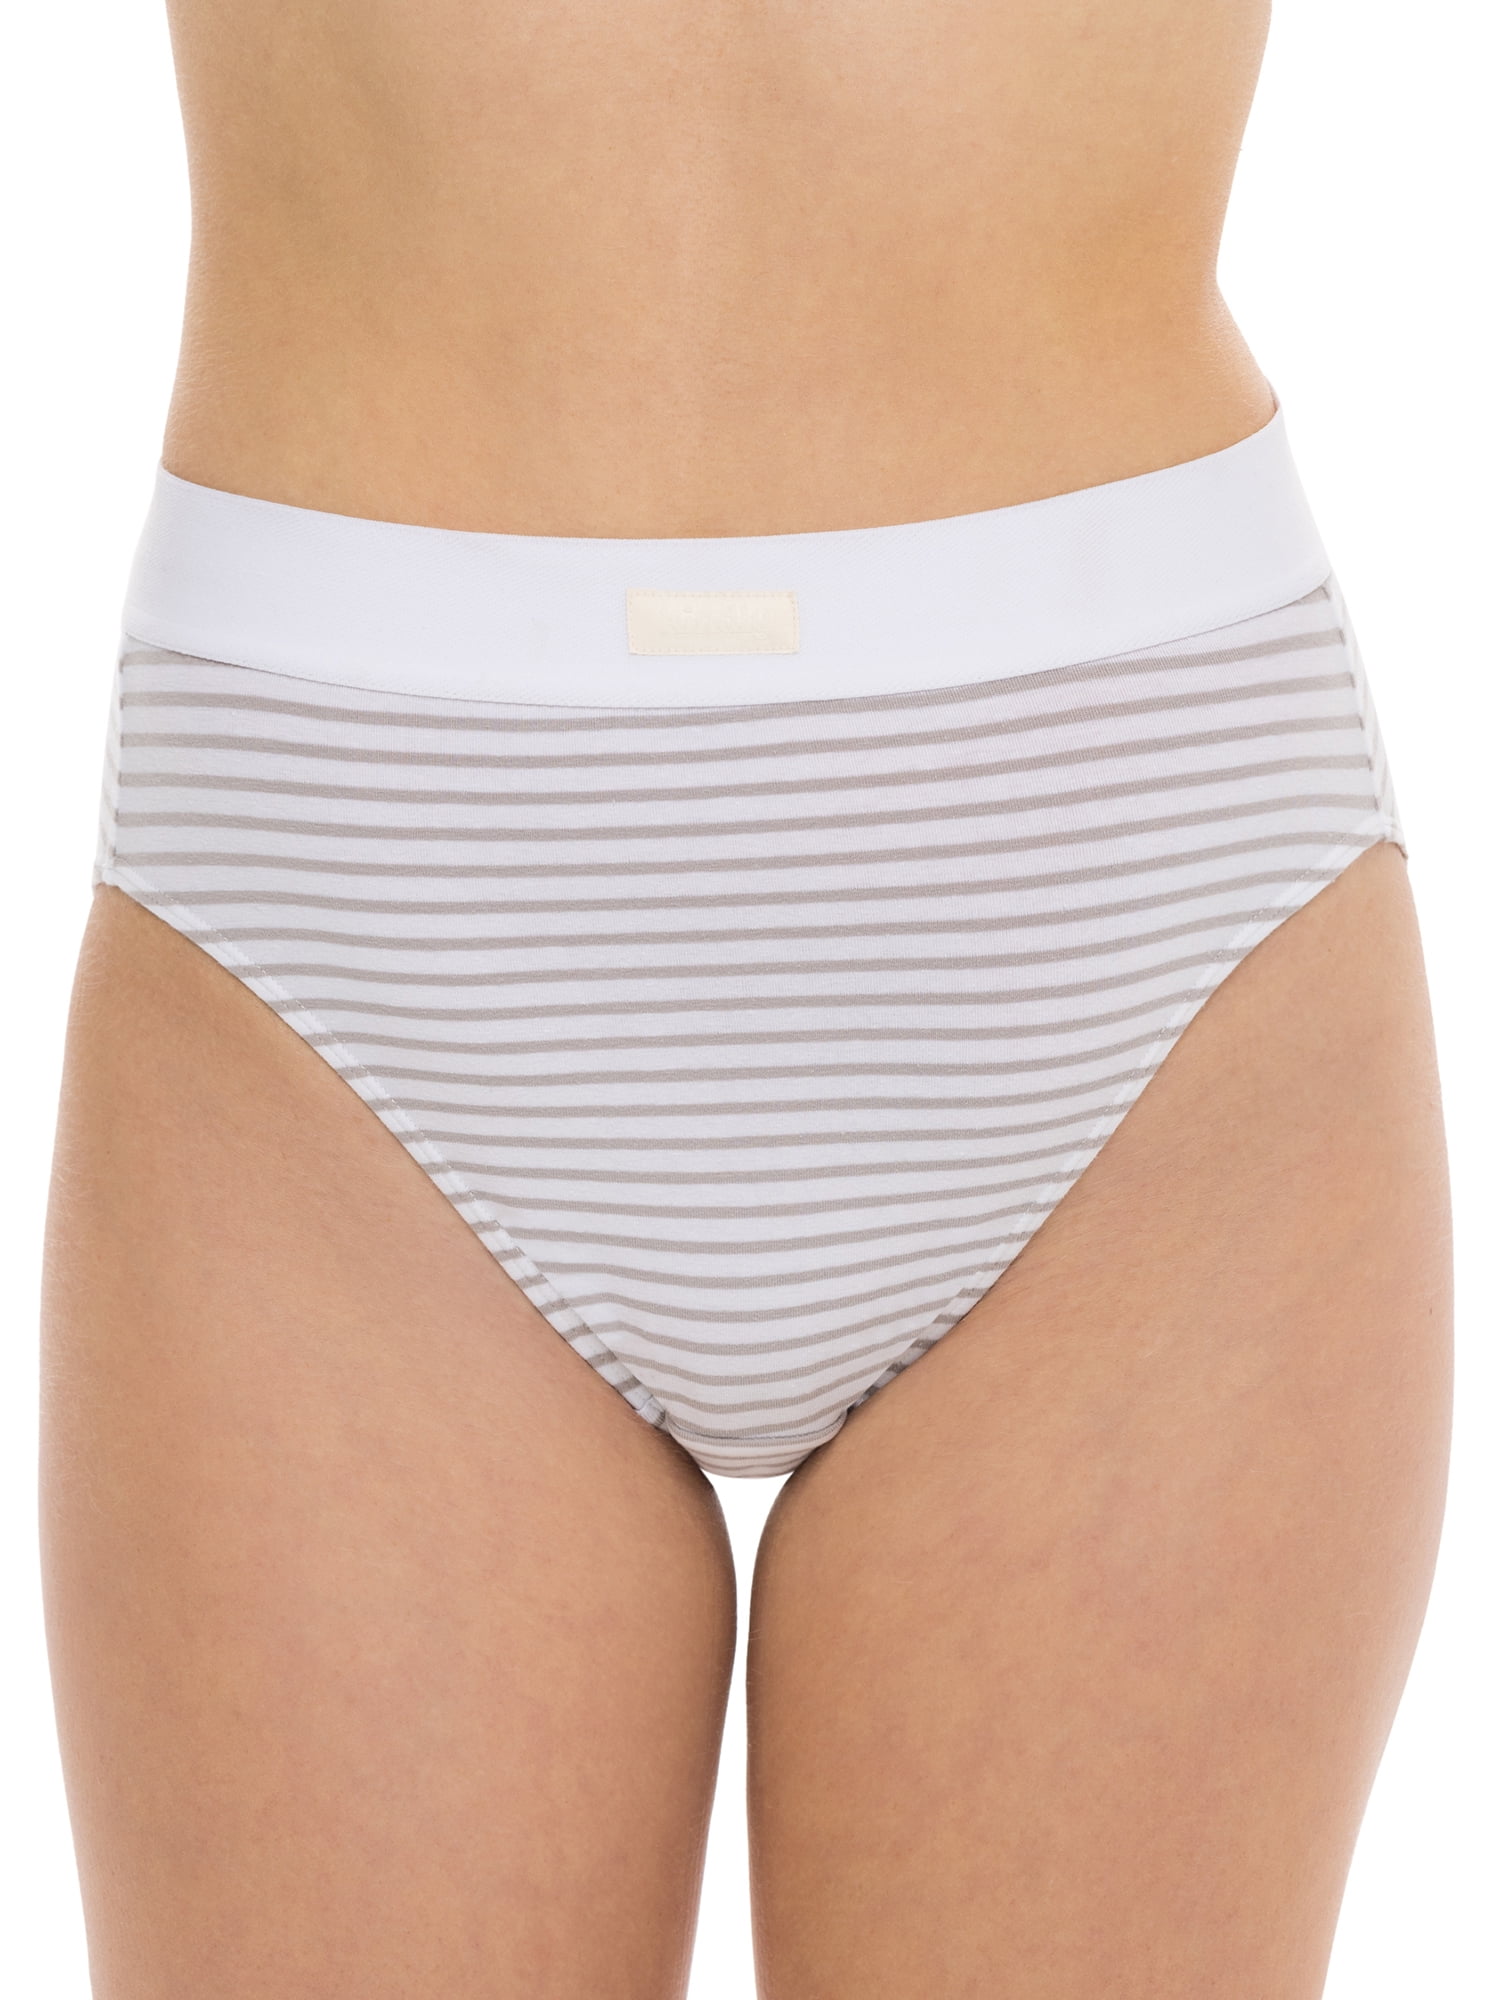 Kindly Yours Women’s Sustainable Cotton Hi-Cut Underwear, 3-Pack